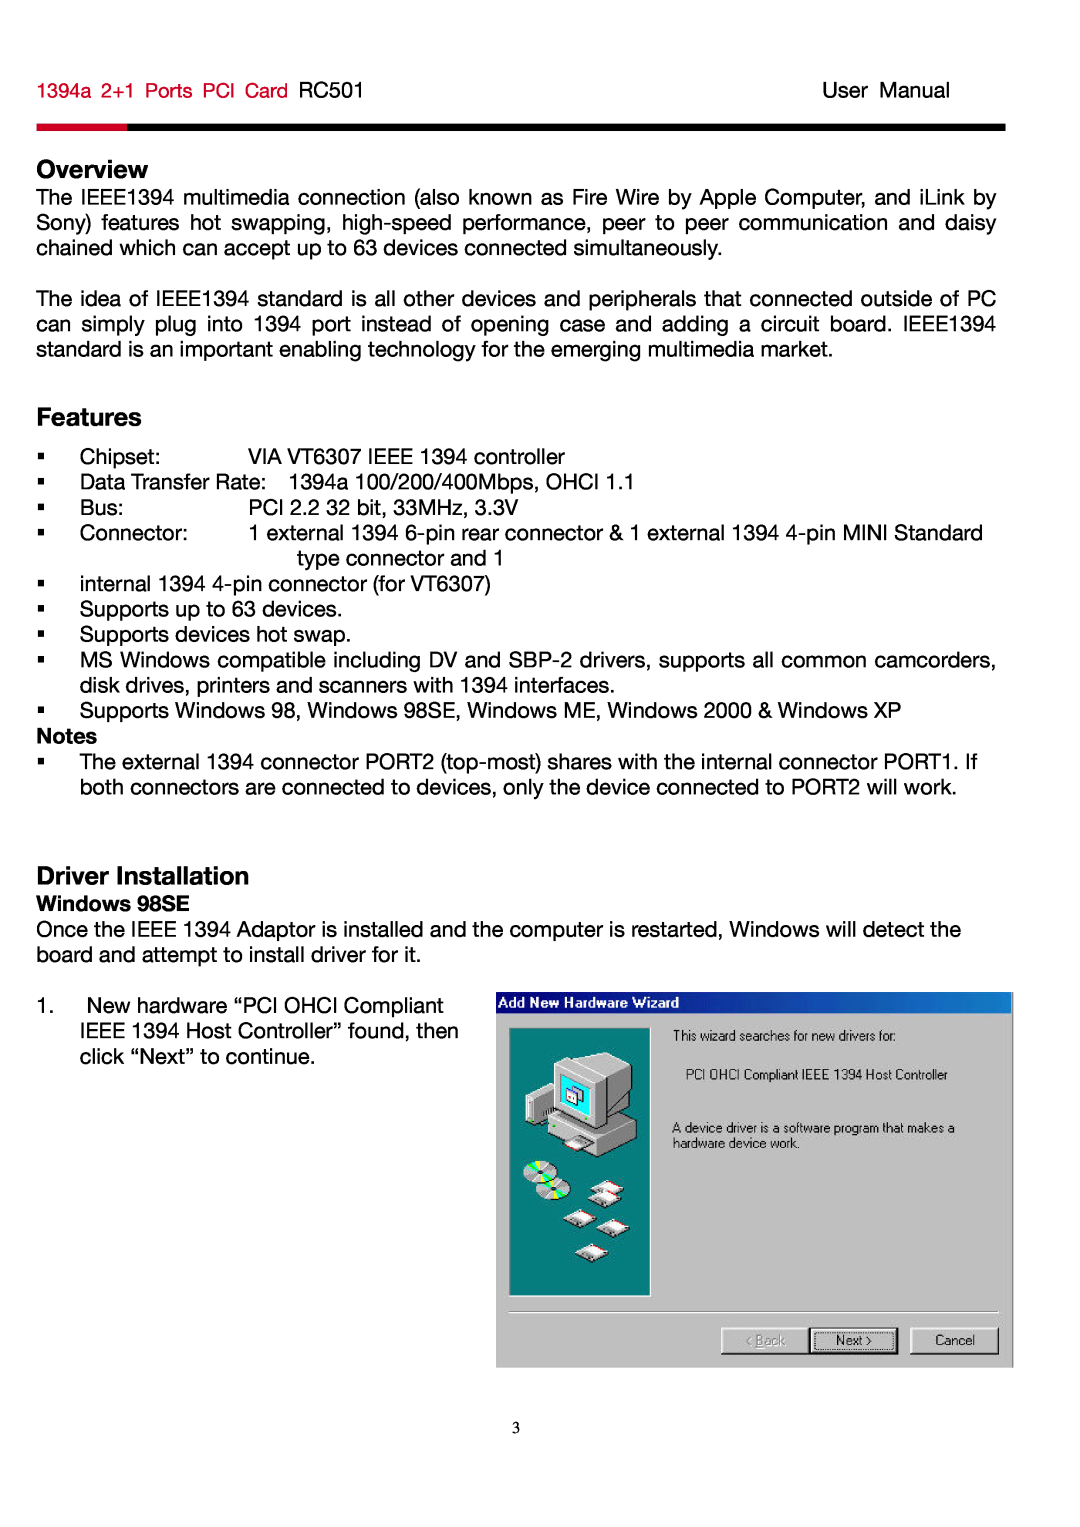 Rosewill RC501 user manual Windows 98SE, Overview, Features, Driver Installation 